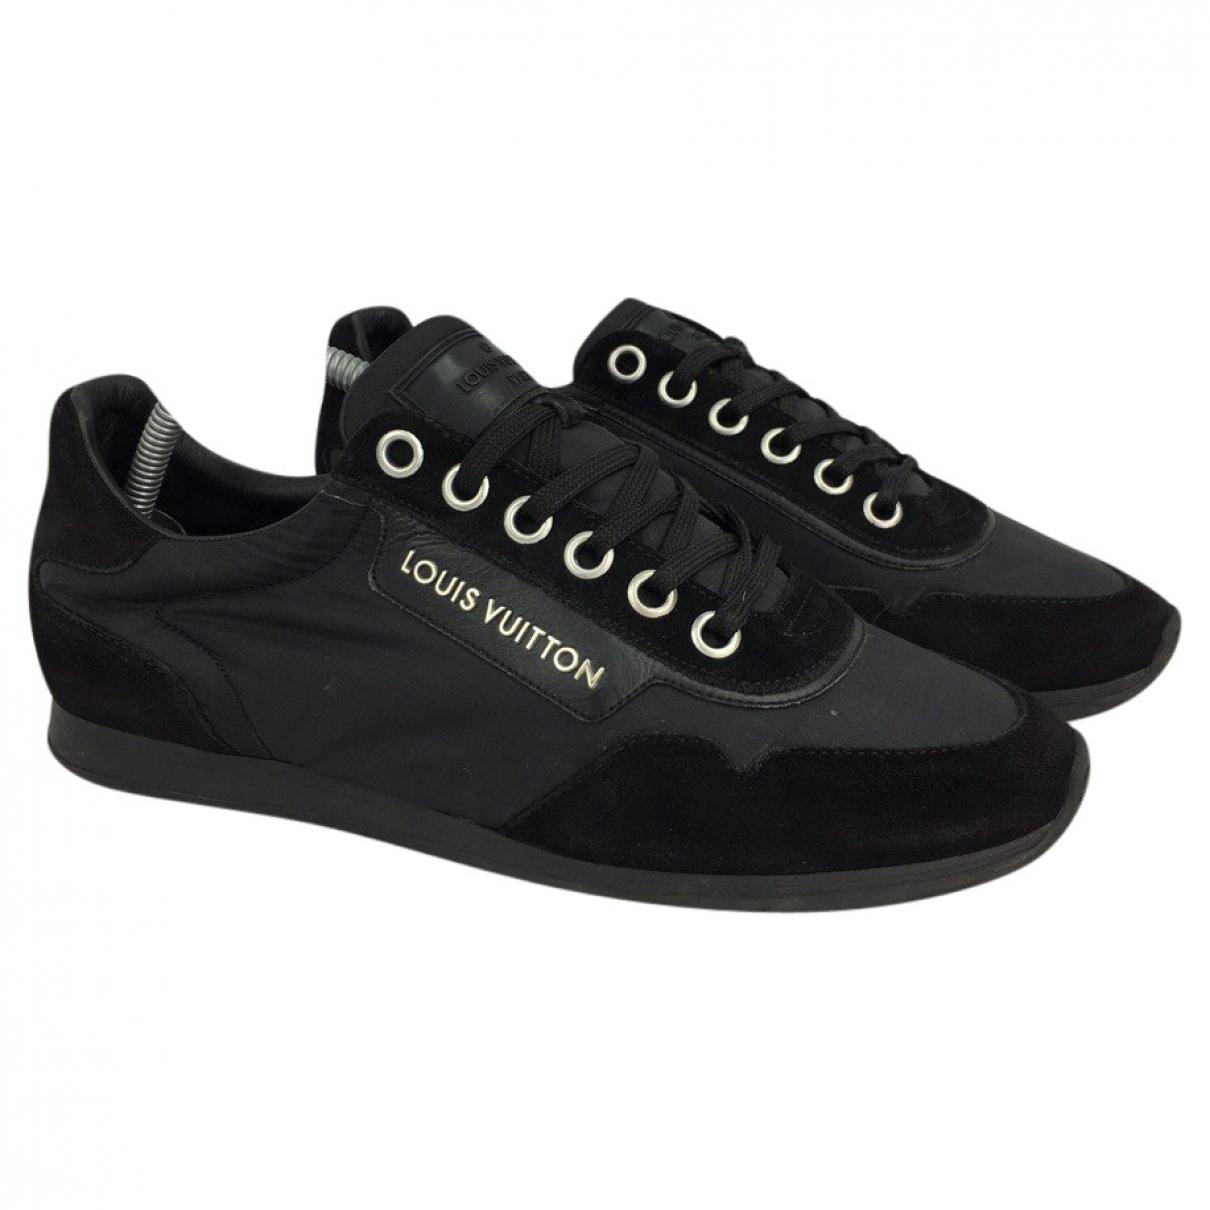 Louis Vuitton Suede Low Trainers in Black for Men - Lyst